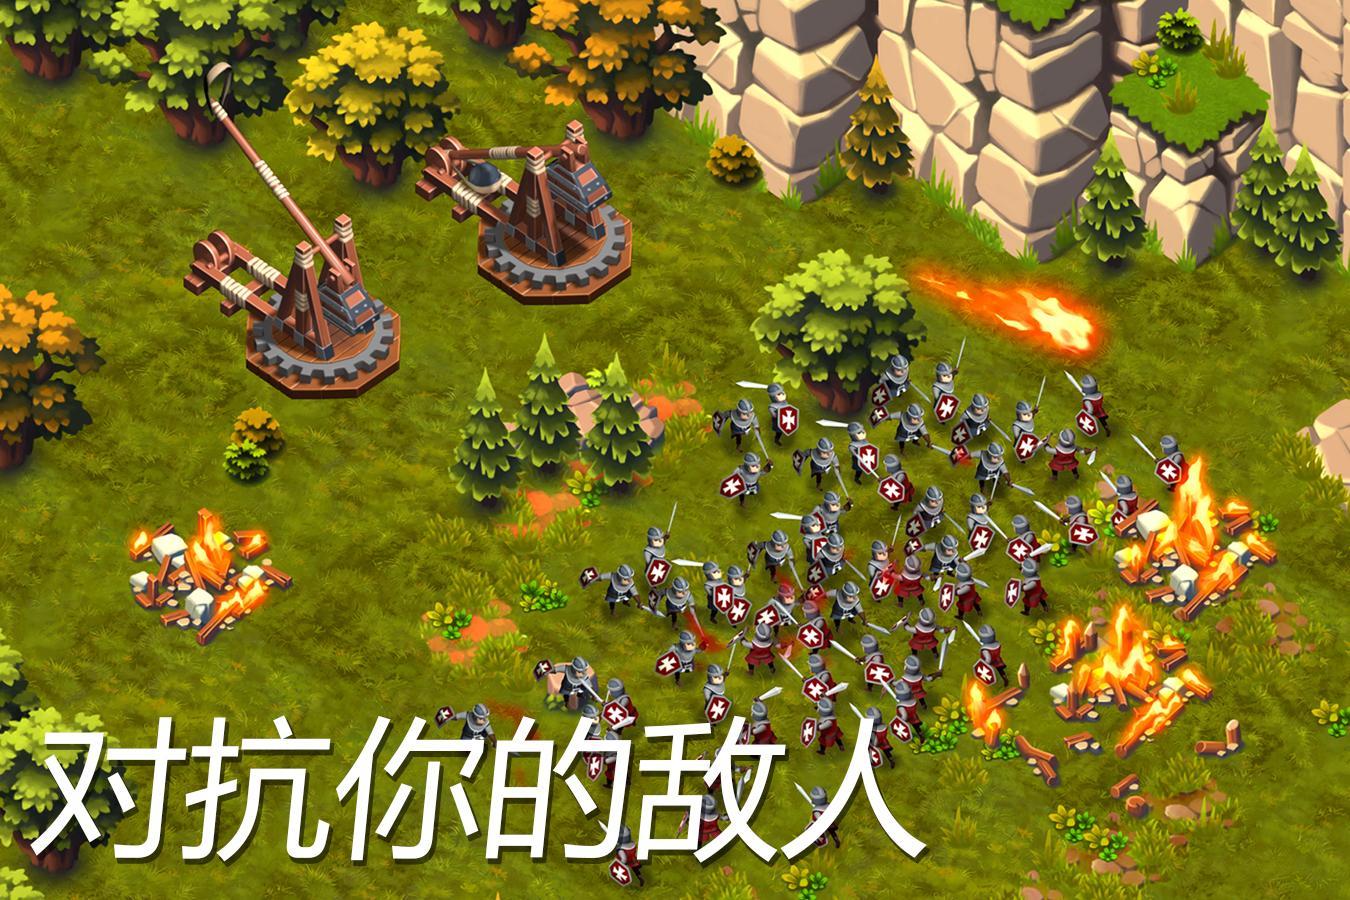 Screenshot 1 of Lords & Castles - RTS MMO ゲーム 1.81